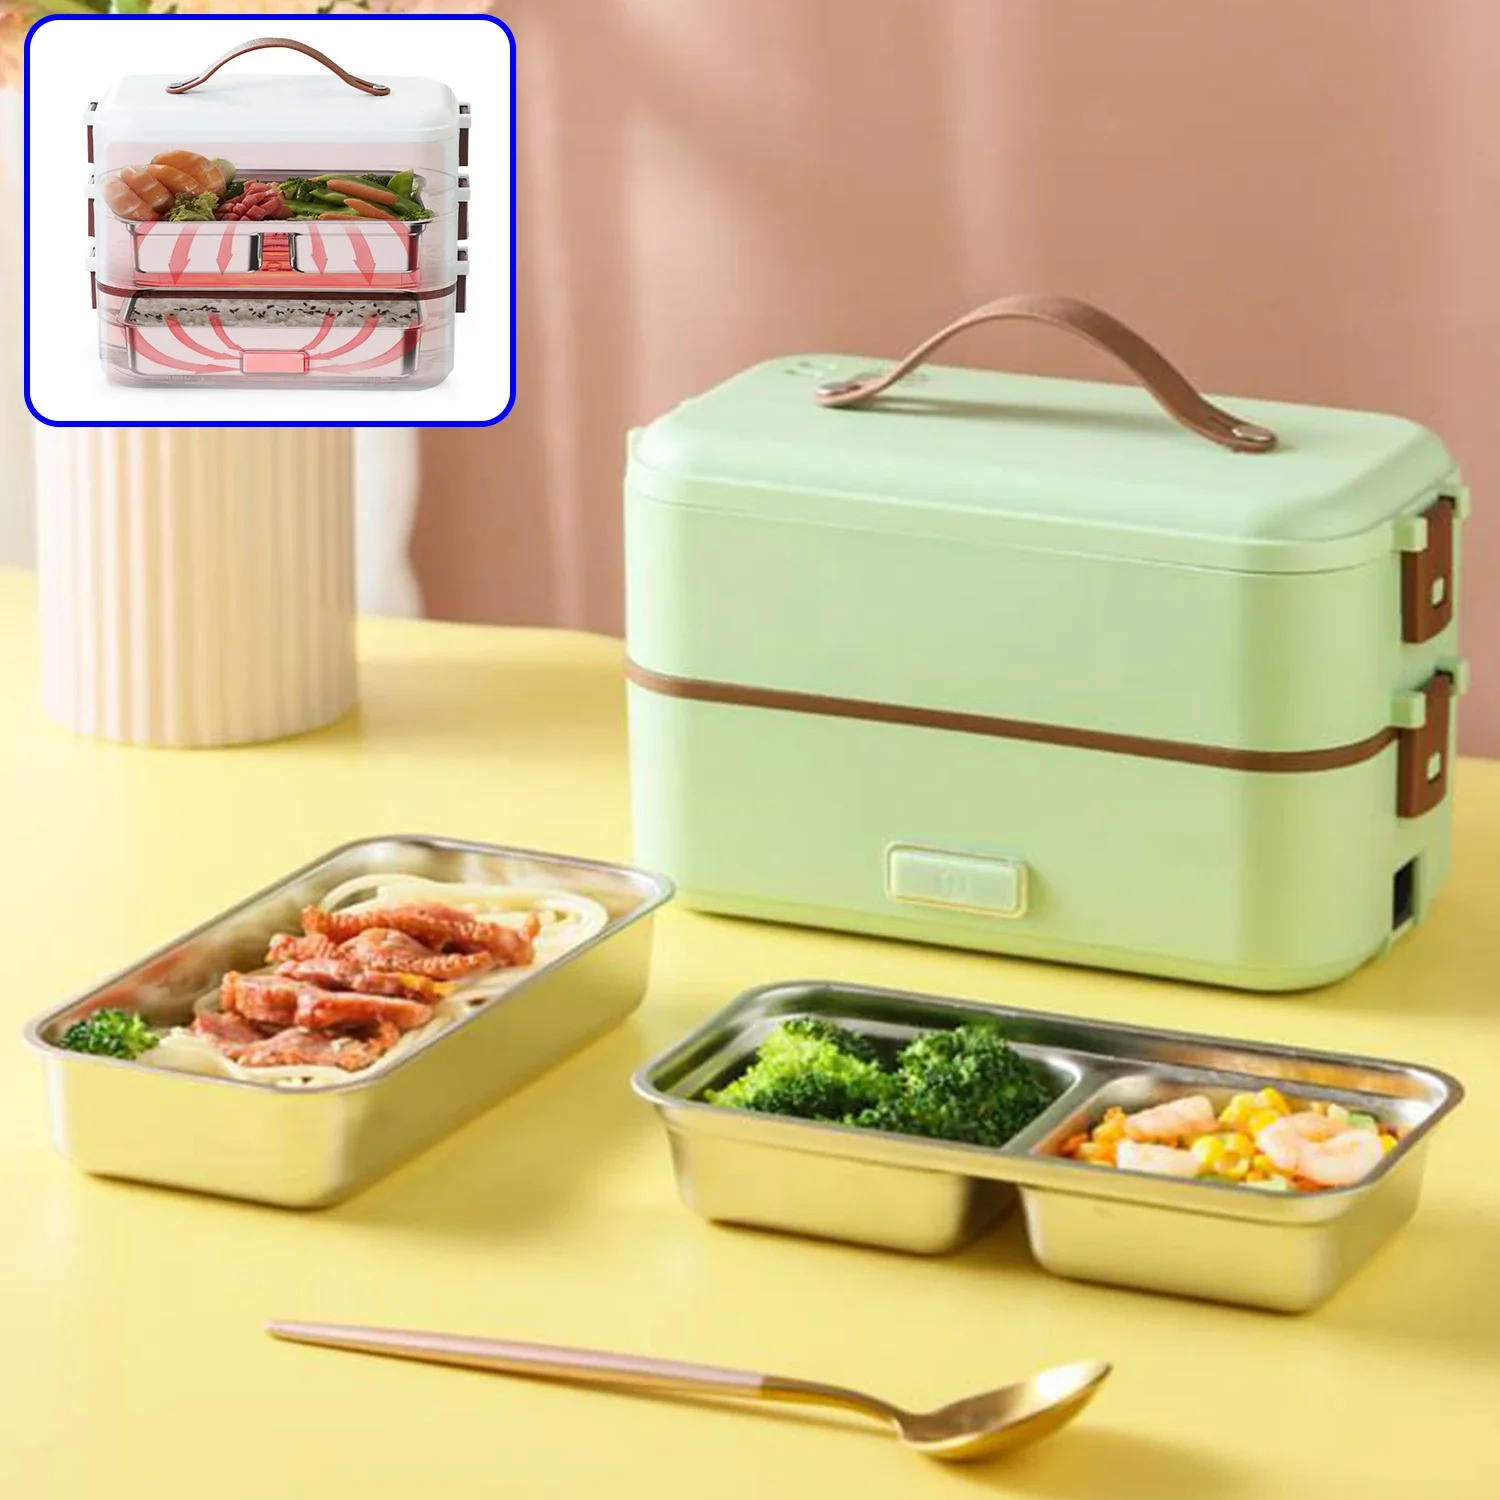 

Electric Lunch Box,Heated Thermal Lunch Box,Multilayer Layers Portable Food Warmer LunchBox for Car,Truck,Office Workers,Student